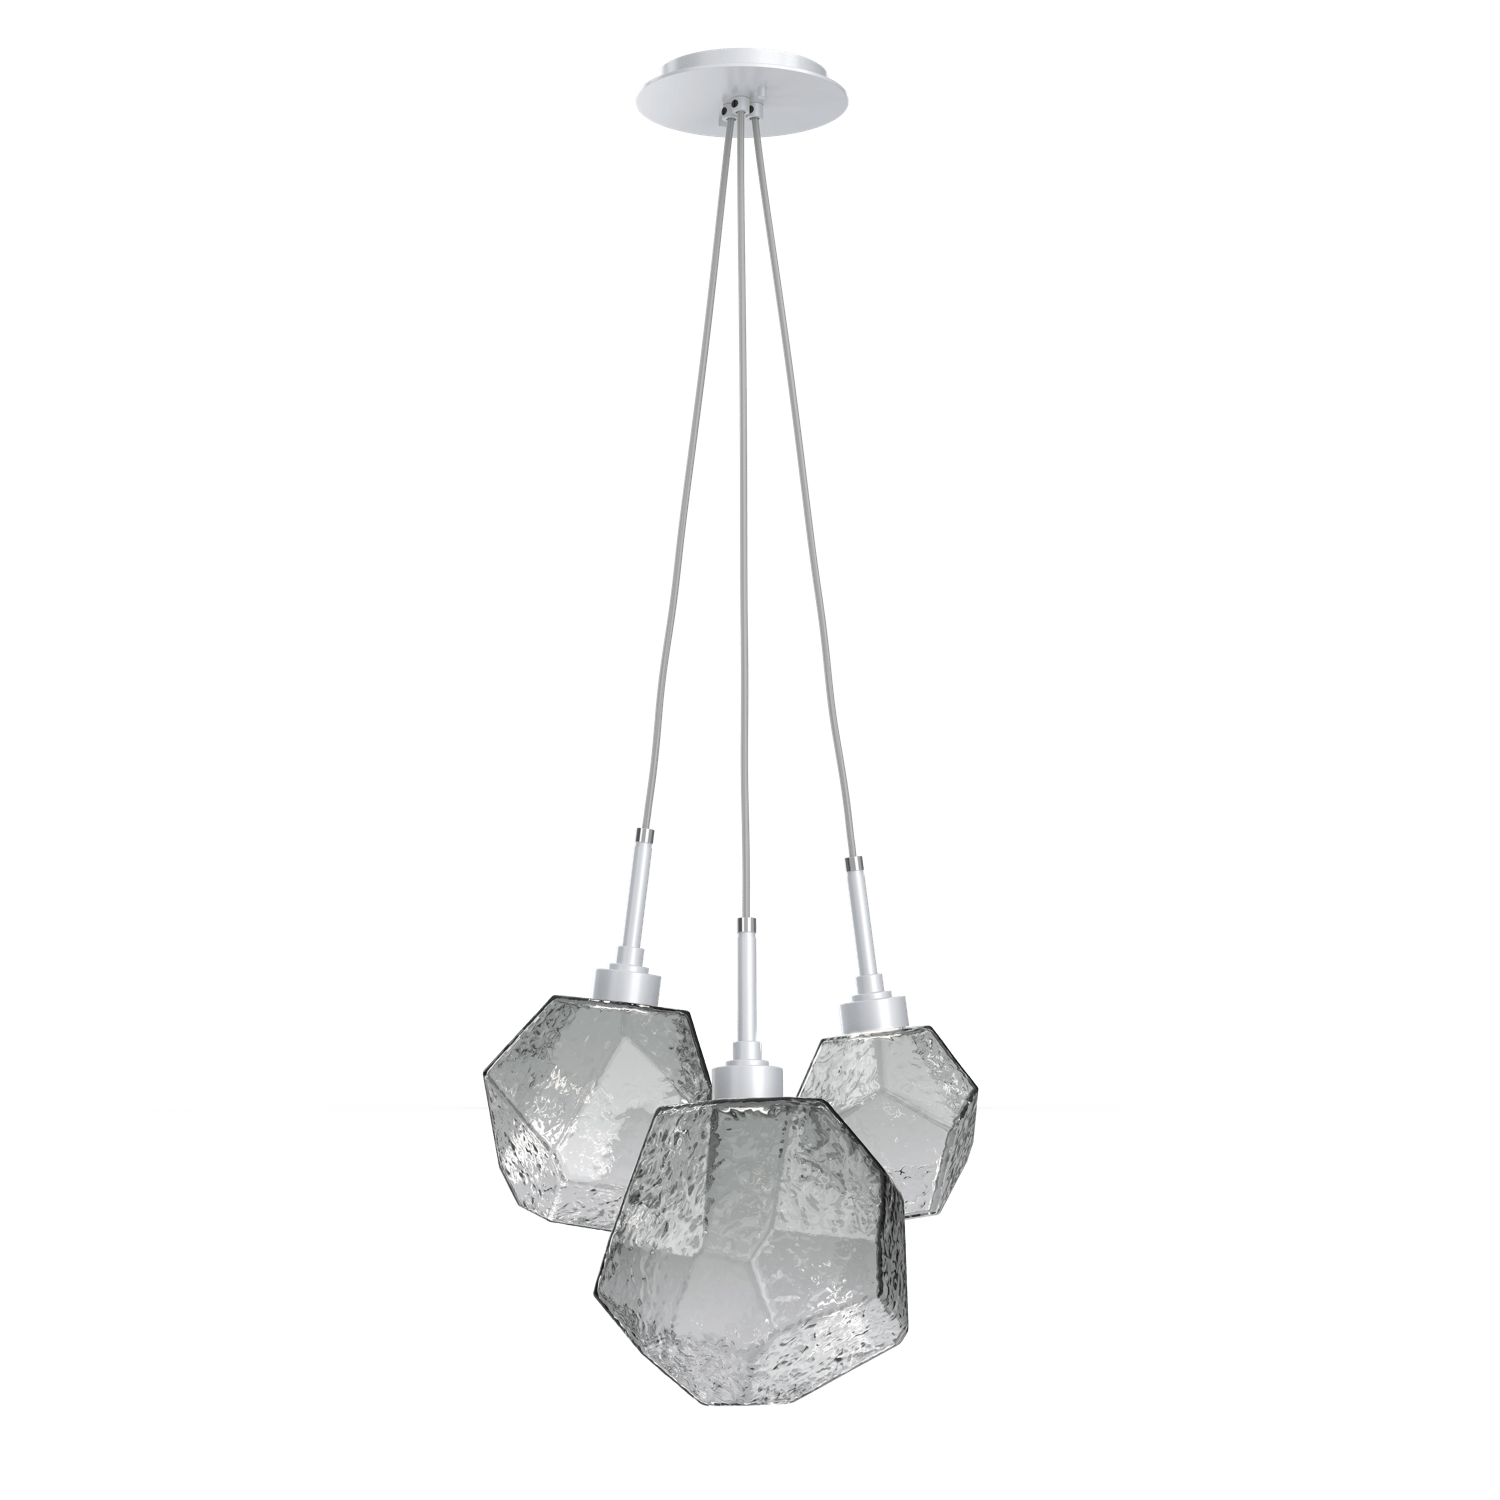 CHB0039-0E-CS-S-Hammerton-Studio-Gem-3-light-cluster-pendant-light-with-classic-silver-finish-and-smoke-blown-glass-shades-and-LED-lamping